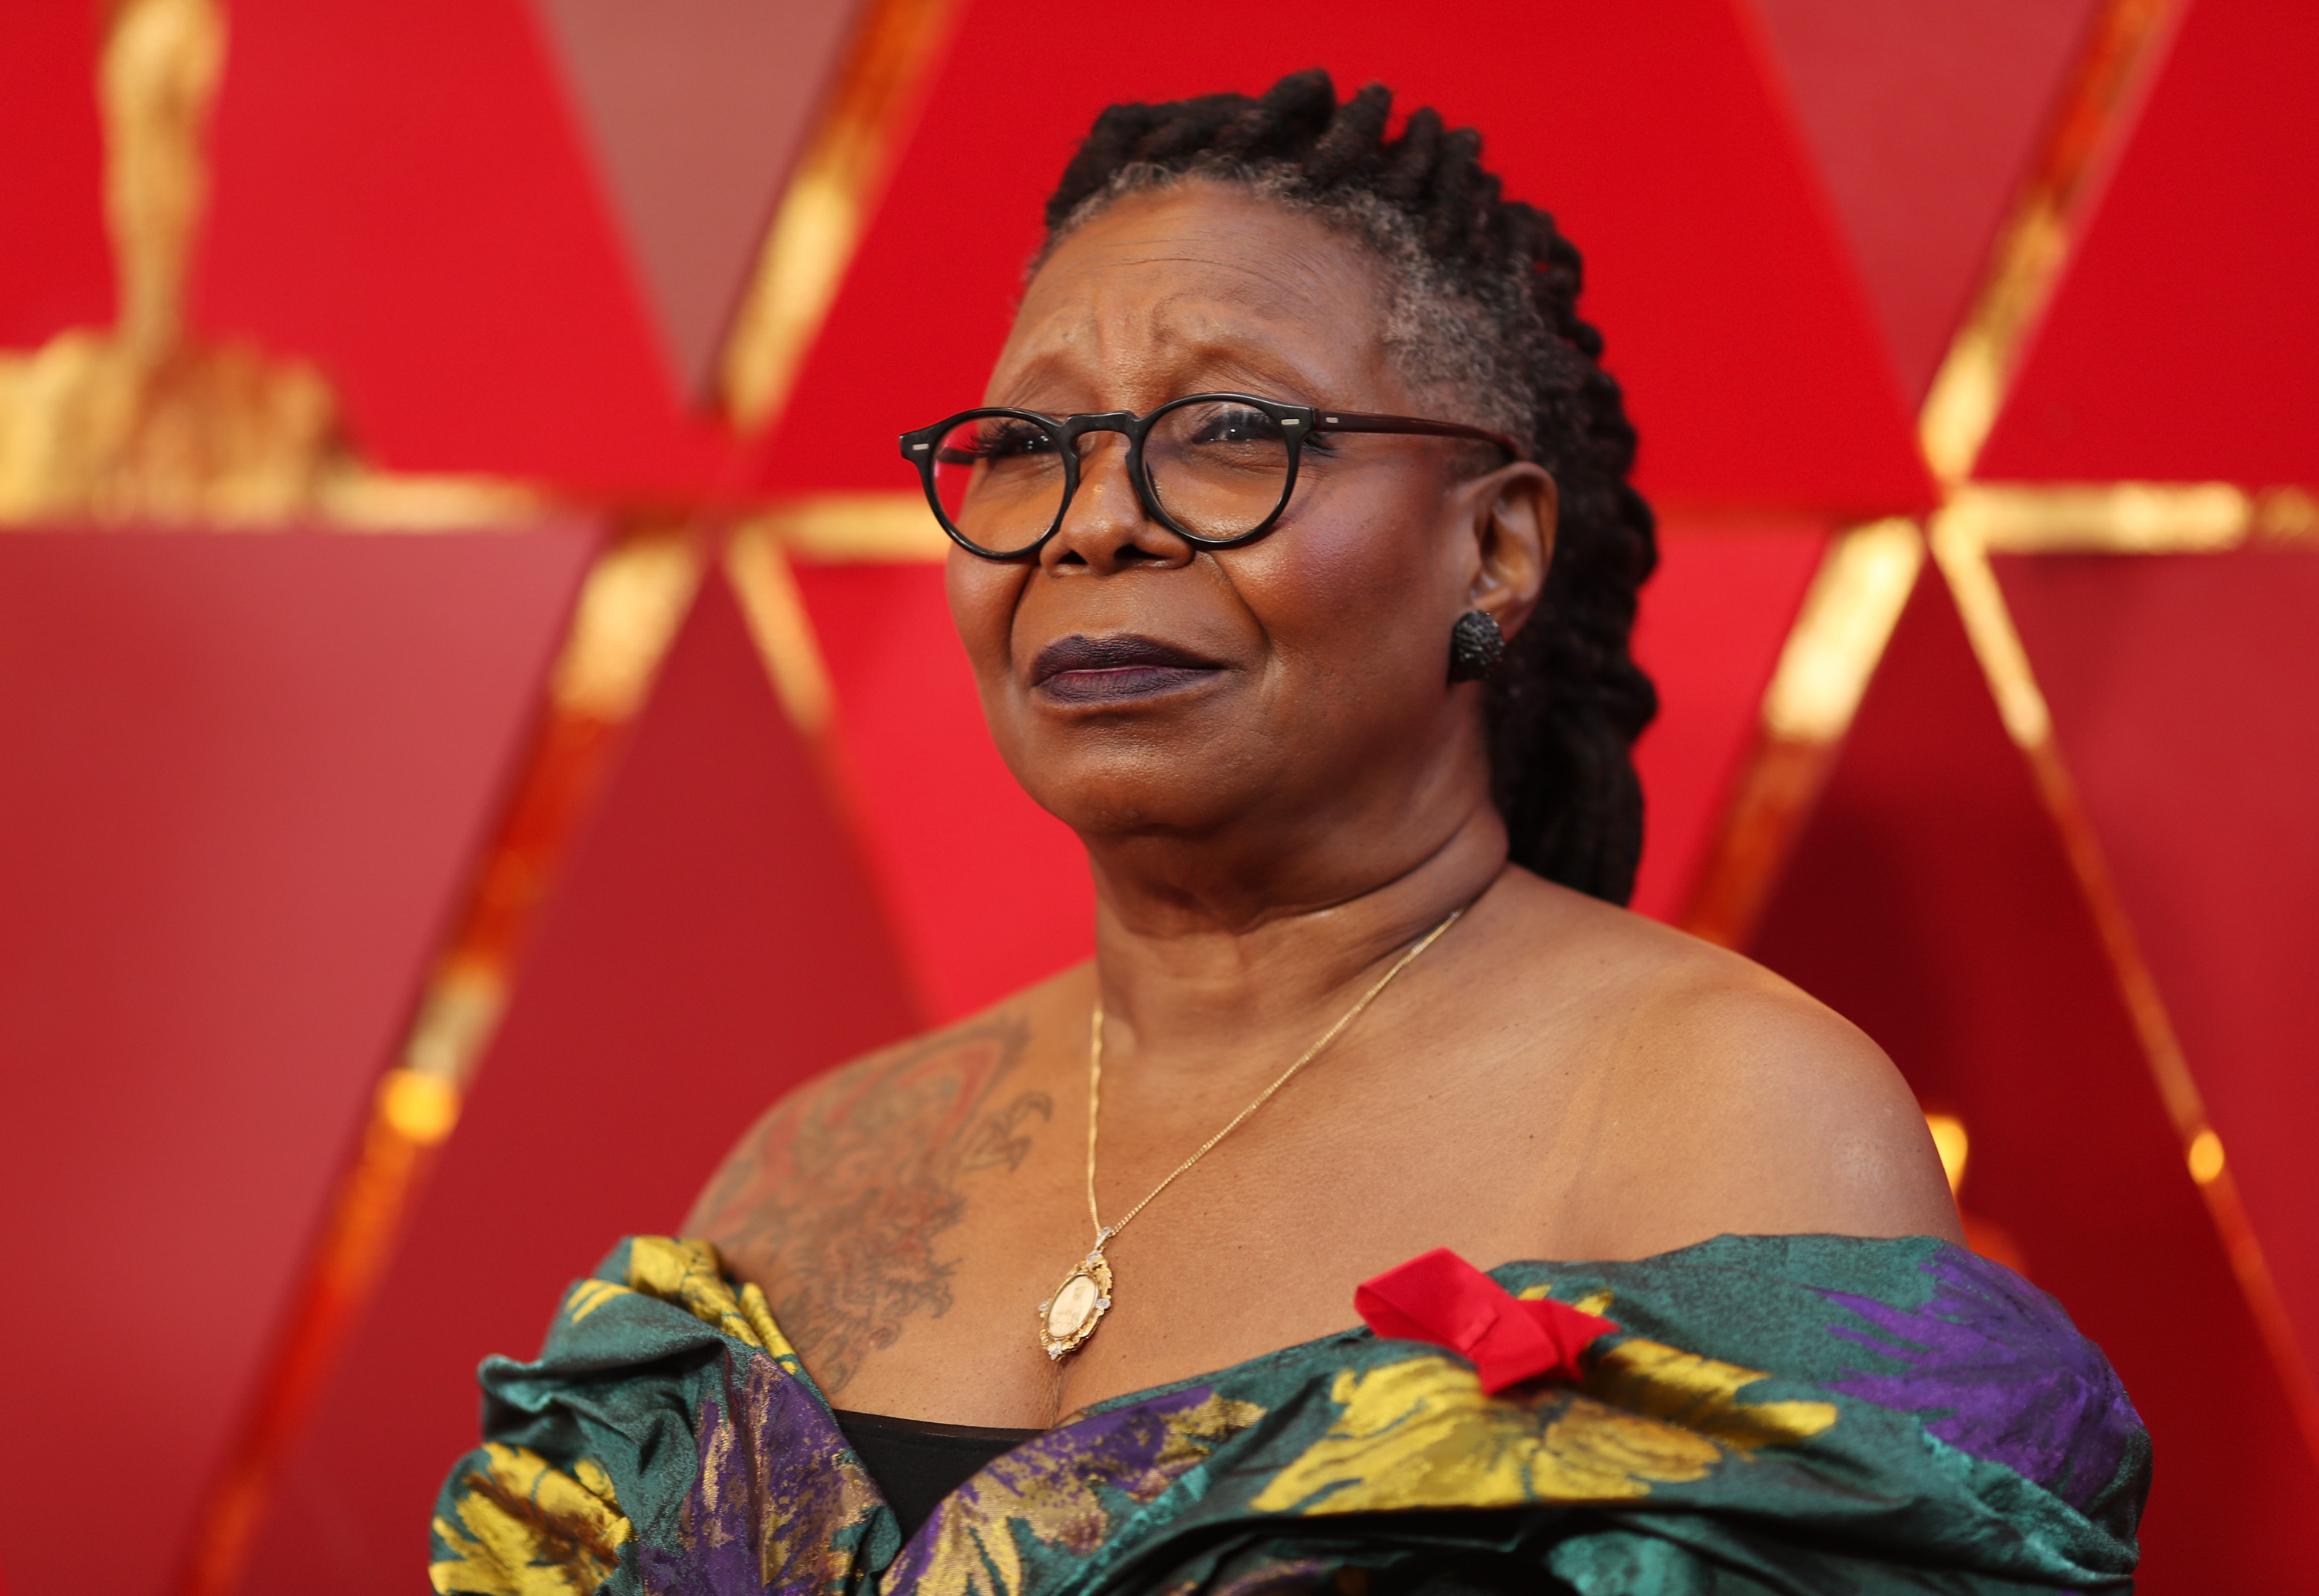 Whoopi Goldberg attends the 90th Annual Academy Awards at Hollywood & Highland Center on March 4, 2018, in Hollywood, California. | Source: Getty Images